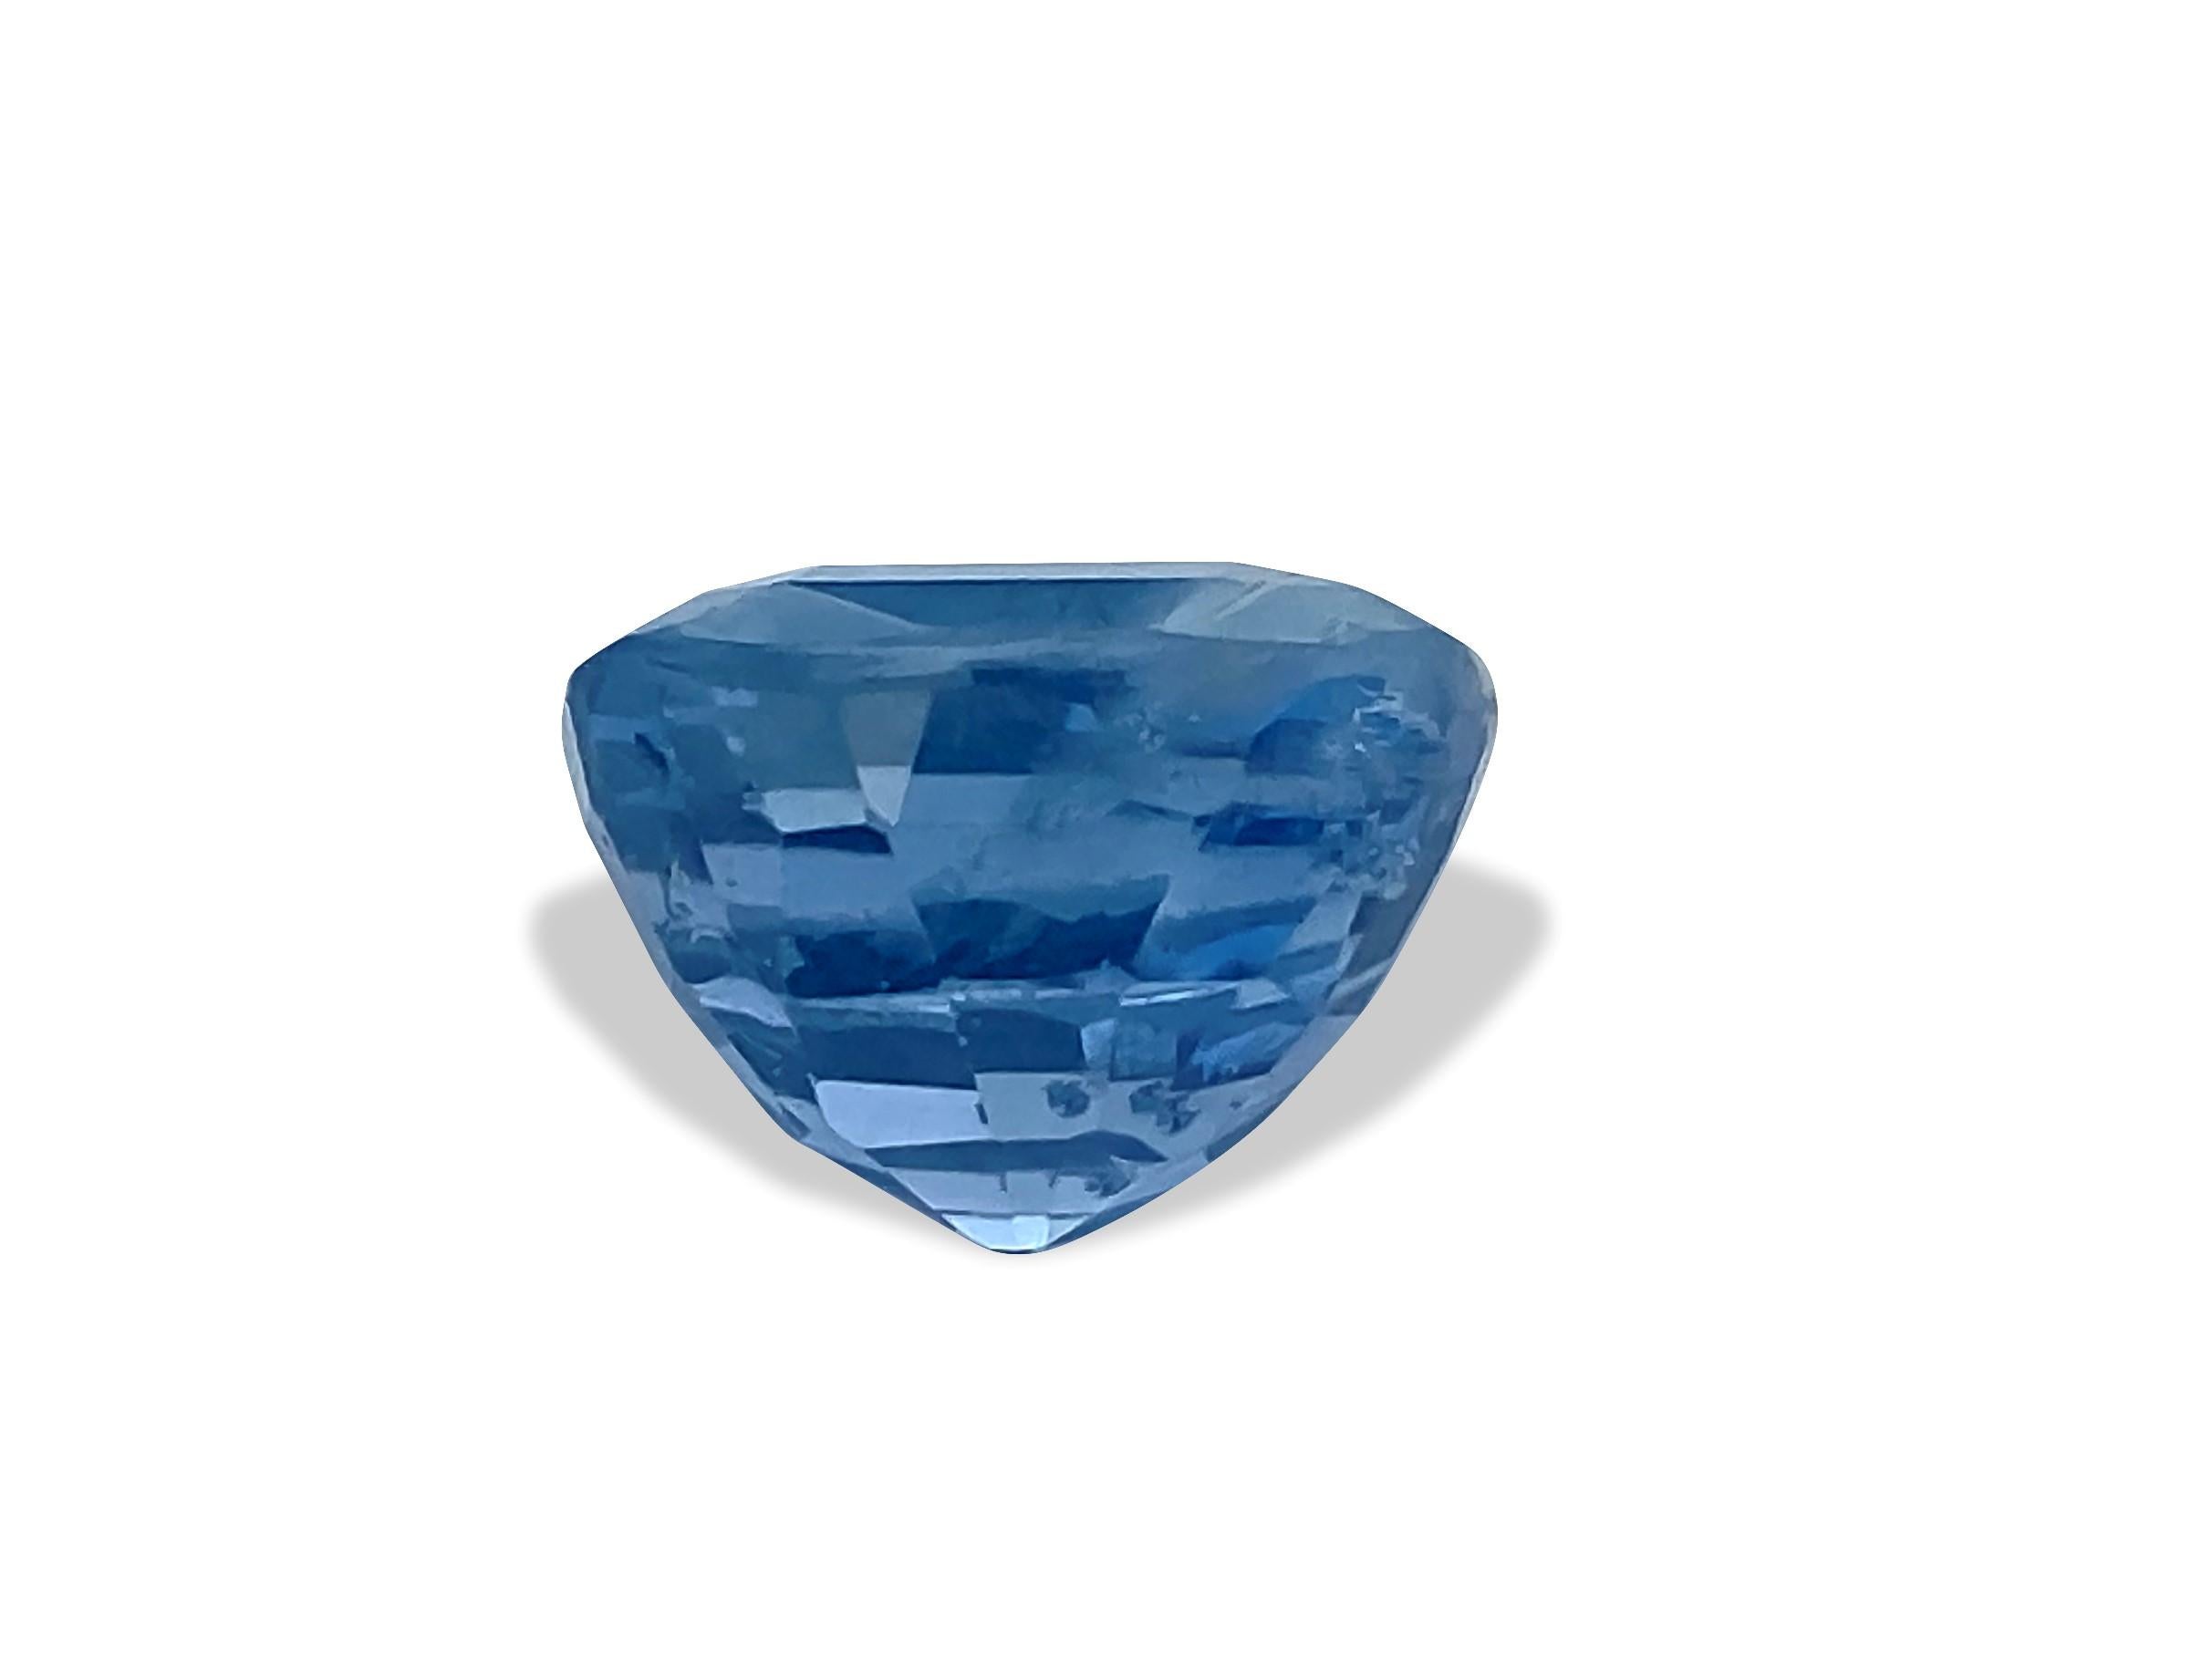 Contemporary GIA Certified 7.02 Carat NO HEAT Blue Sapphire For Sale